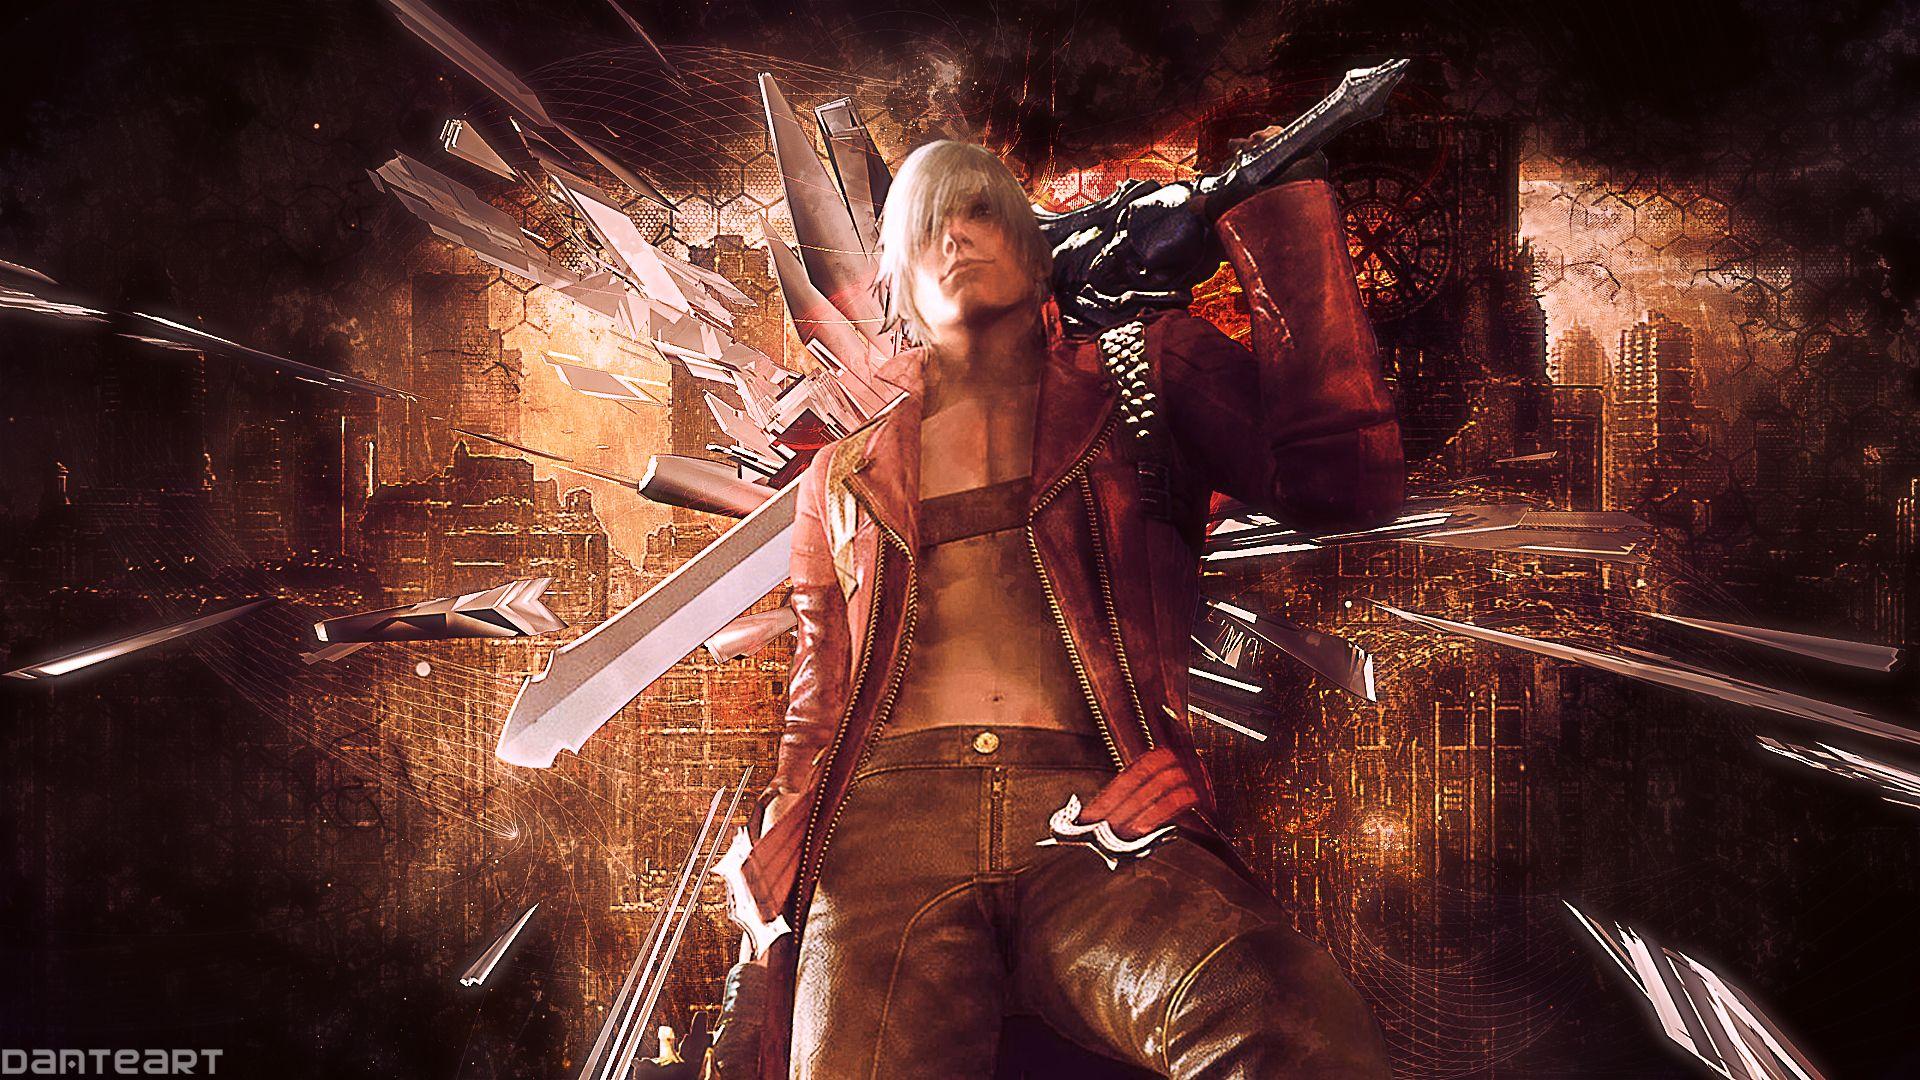 Devil May Cry 3 Wallpaper Gallery